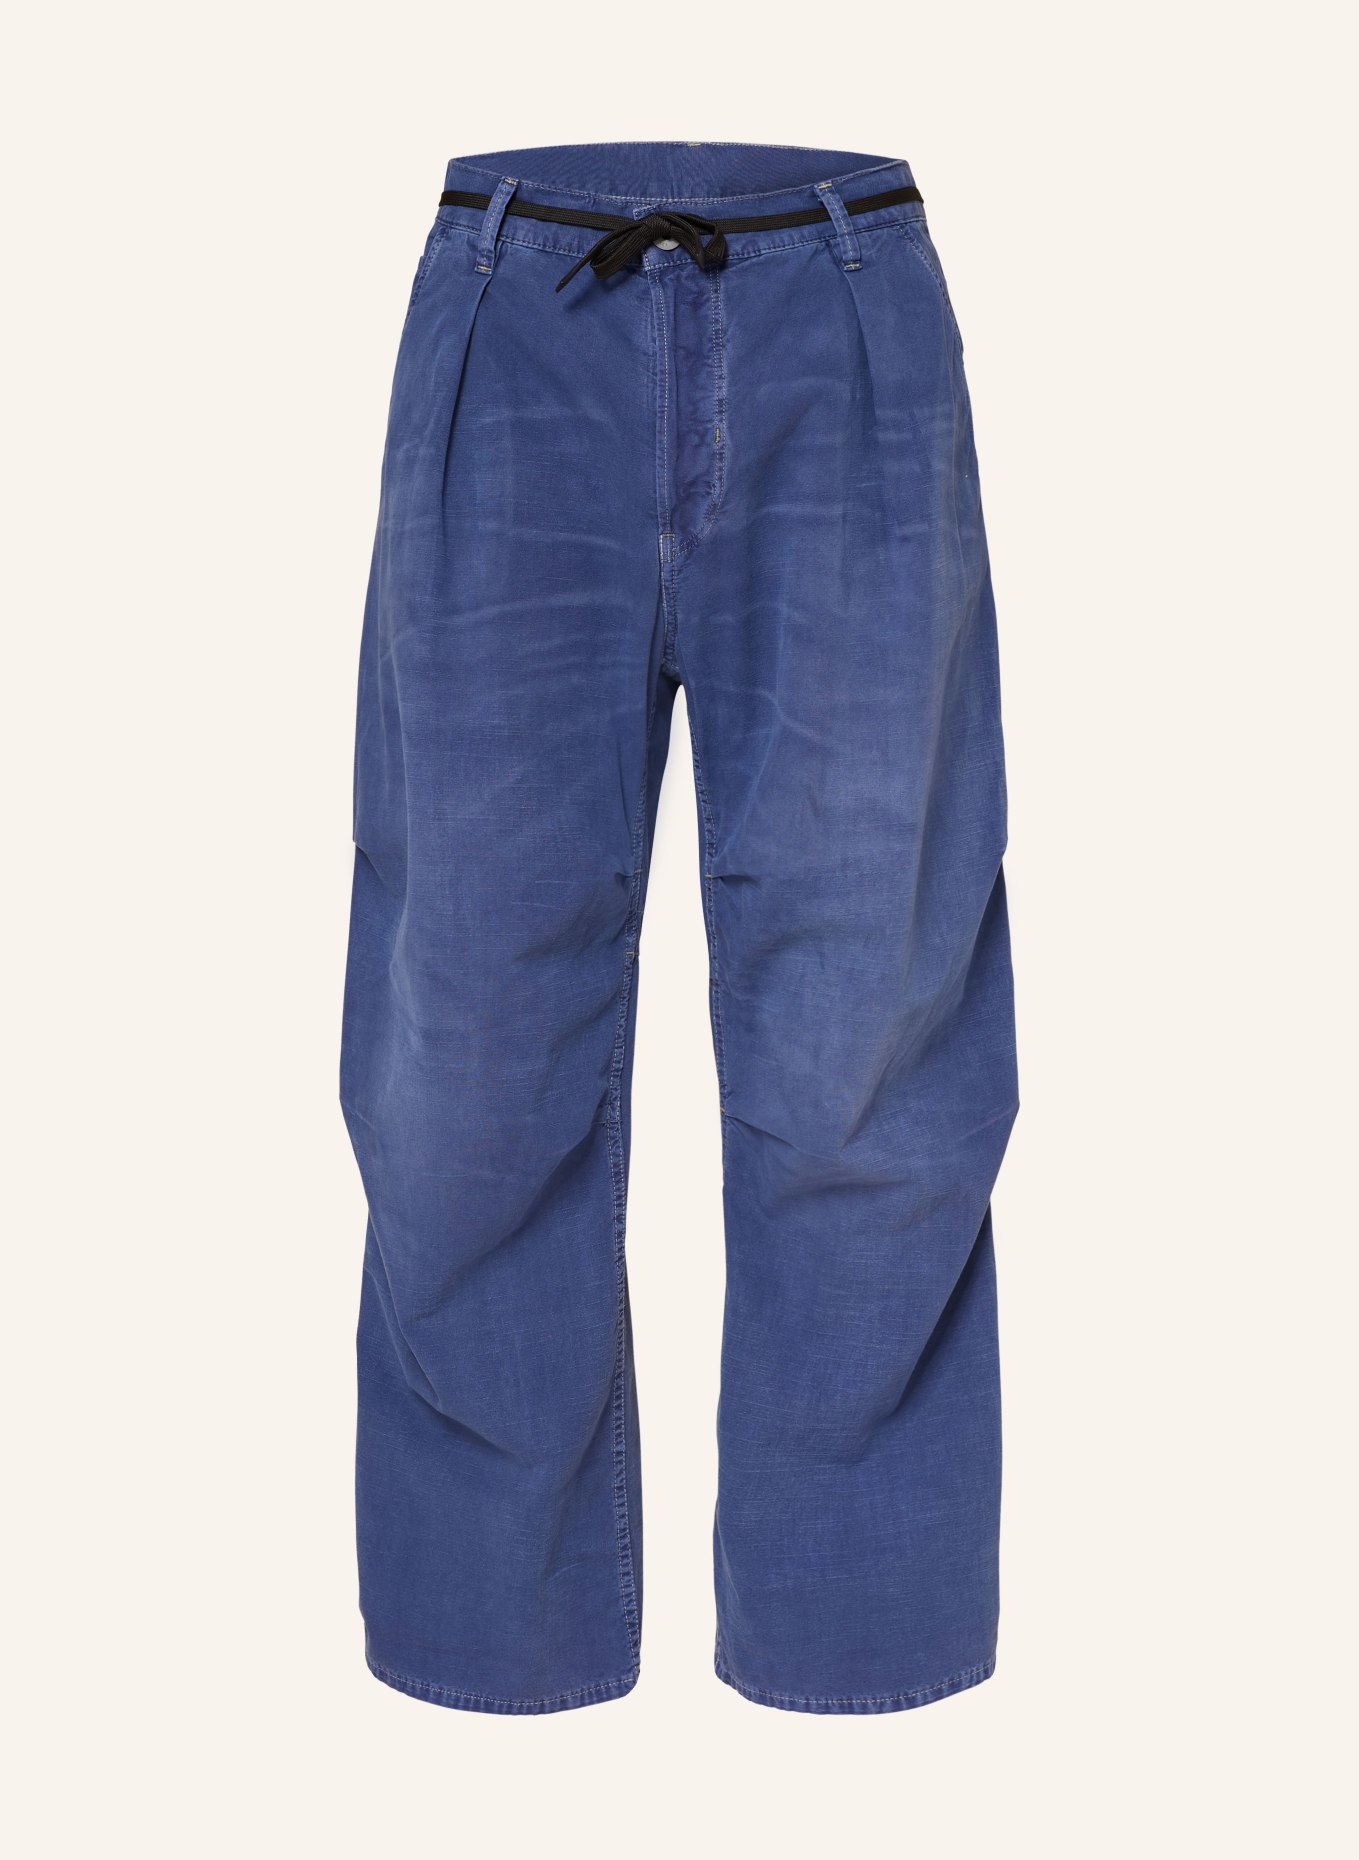 G-Star RAW Trousers straight fit, Color: G335 faded ciel blue gd (Image 1)